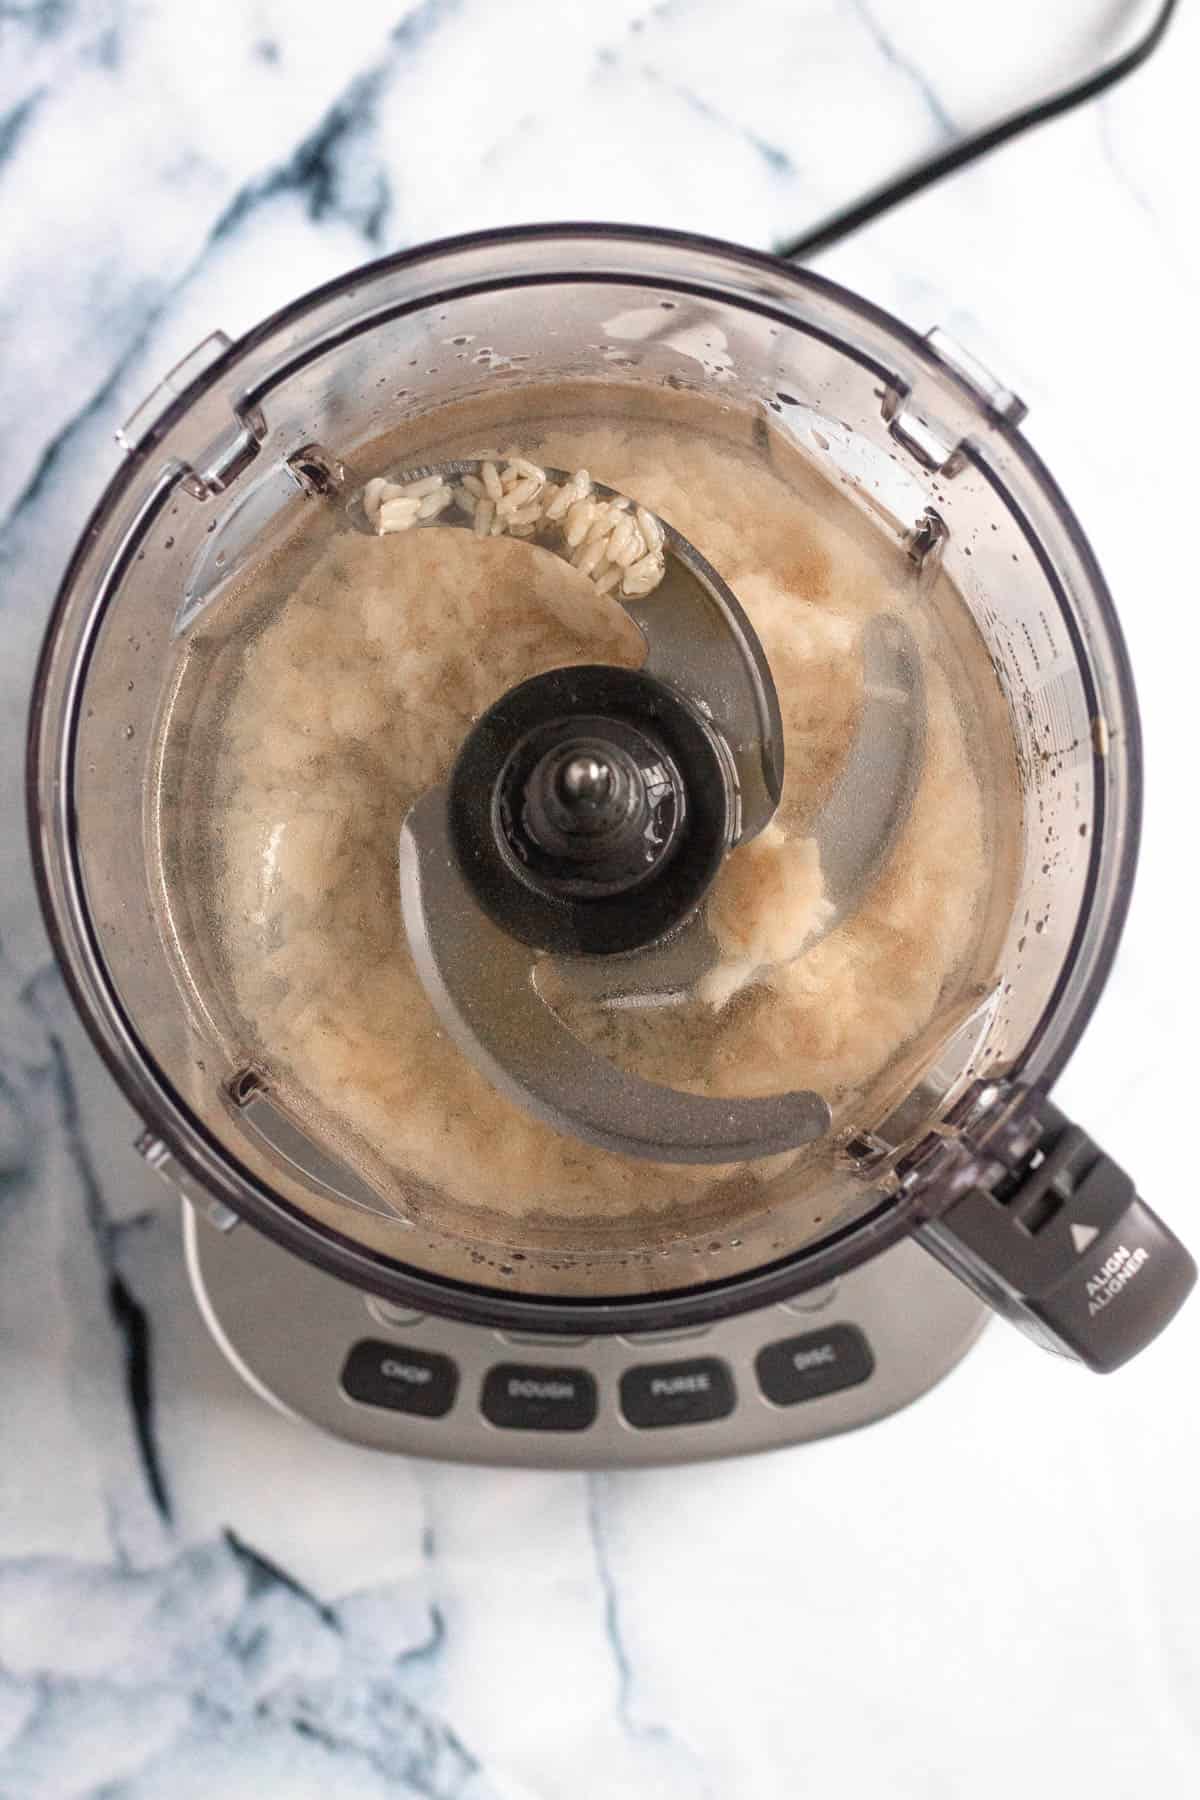 cooked rice, water and maple syrup in a food processor